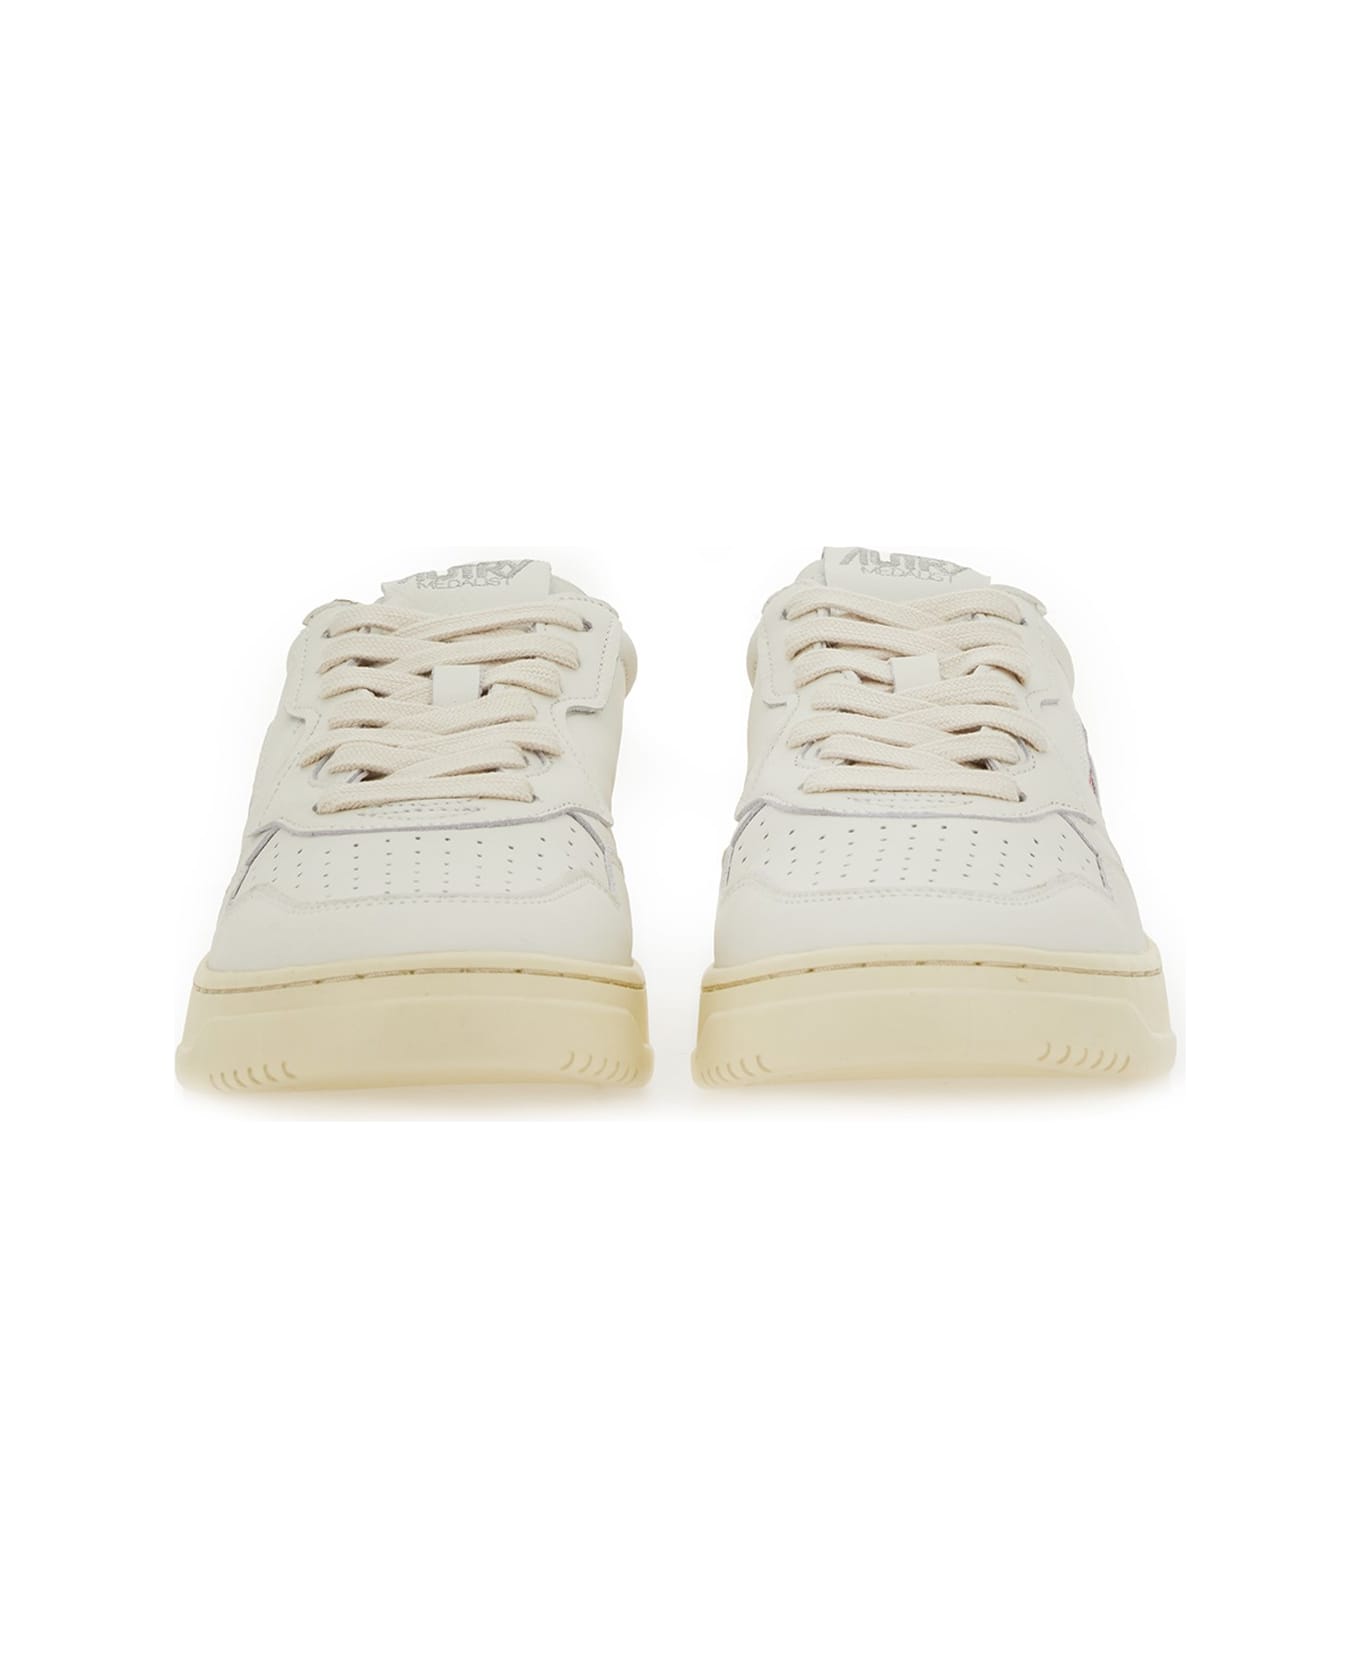 Autry Low 01 Sneakers - White スニーカー